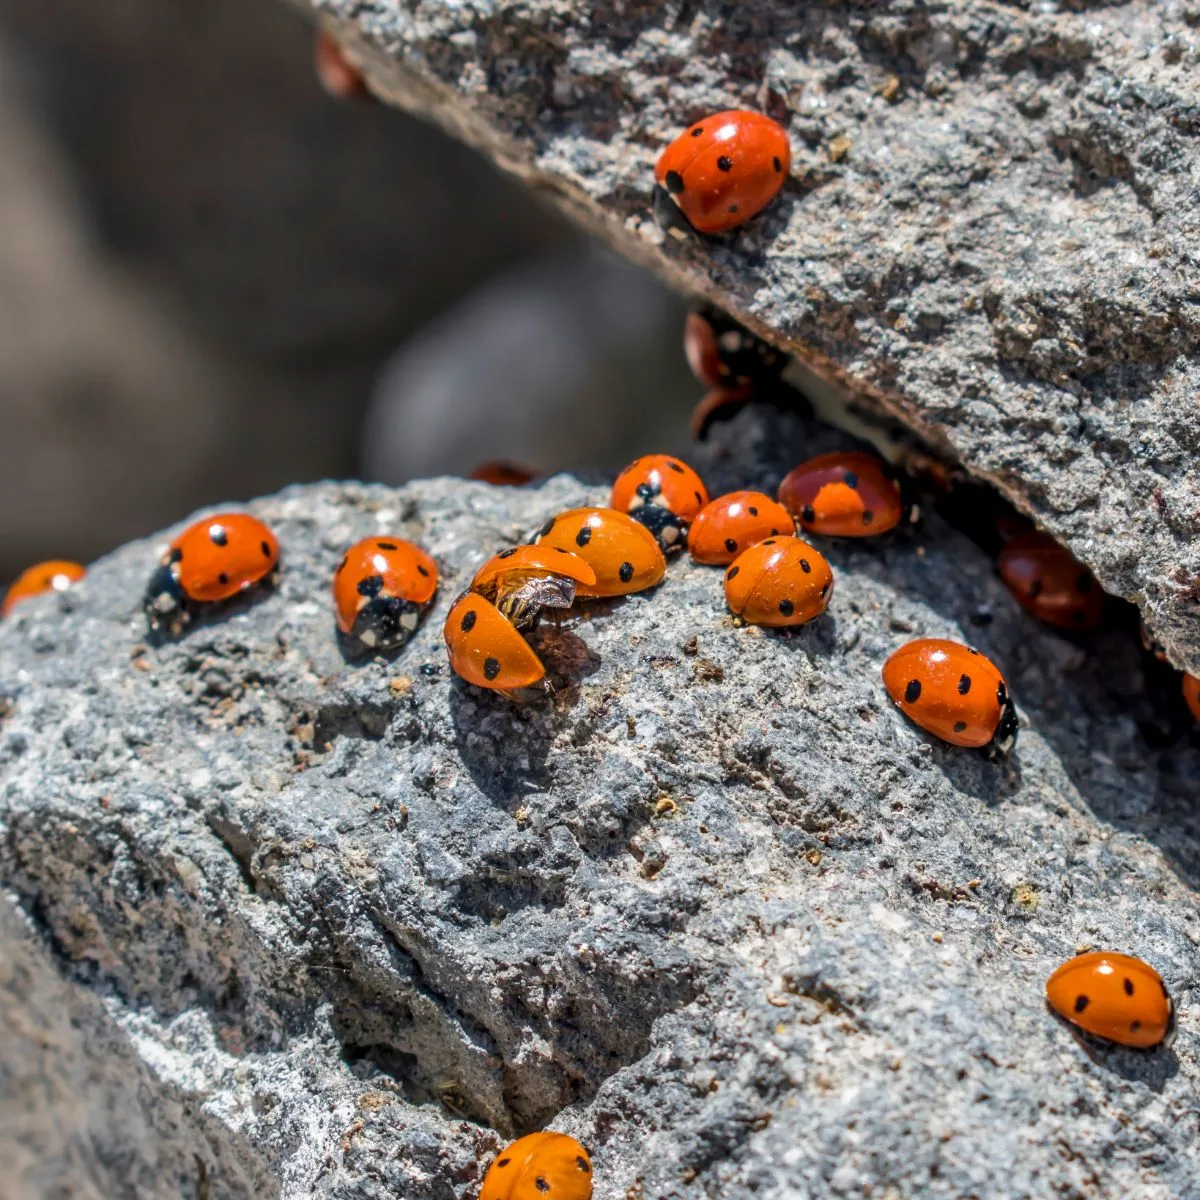 What is the biblical meaning of ladybugs